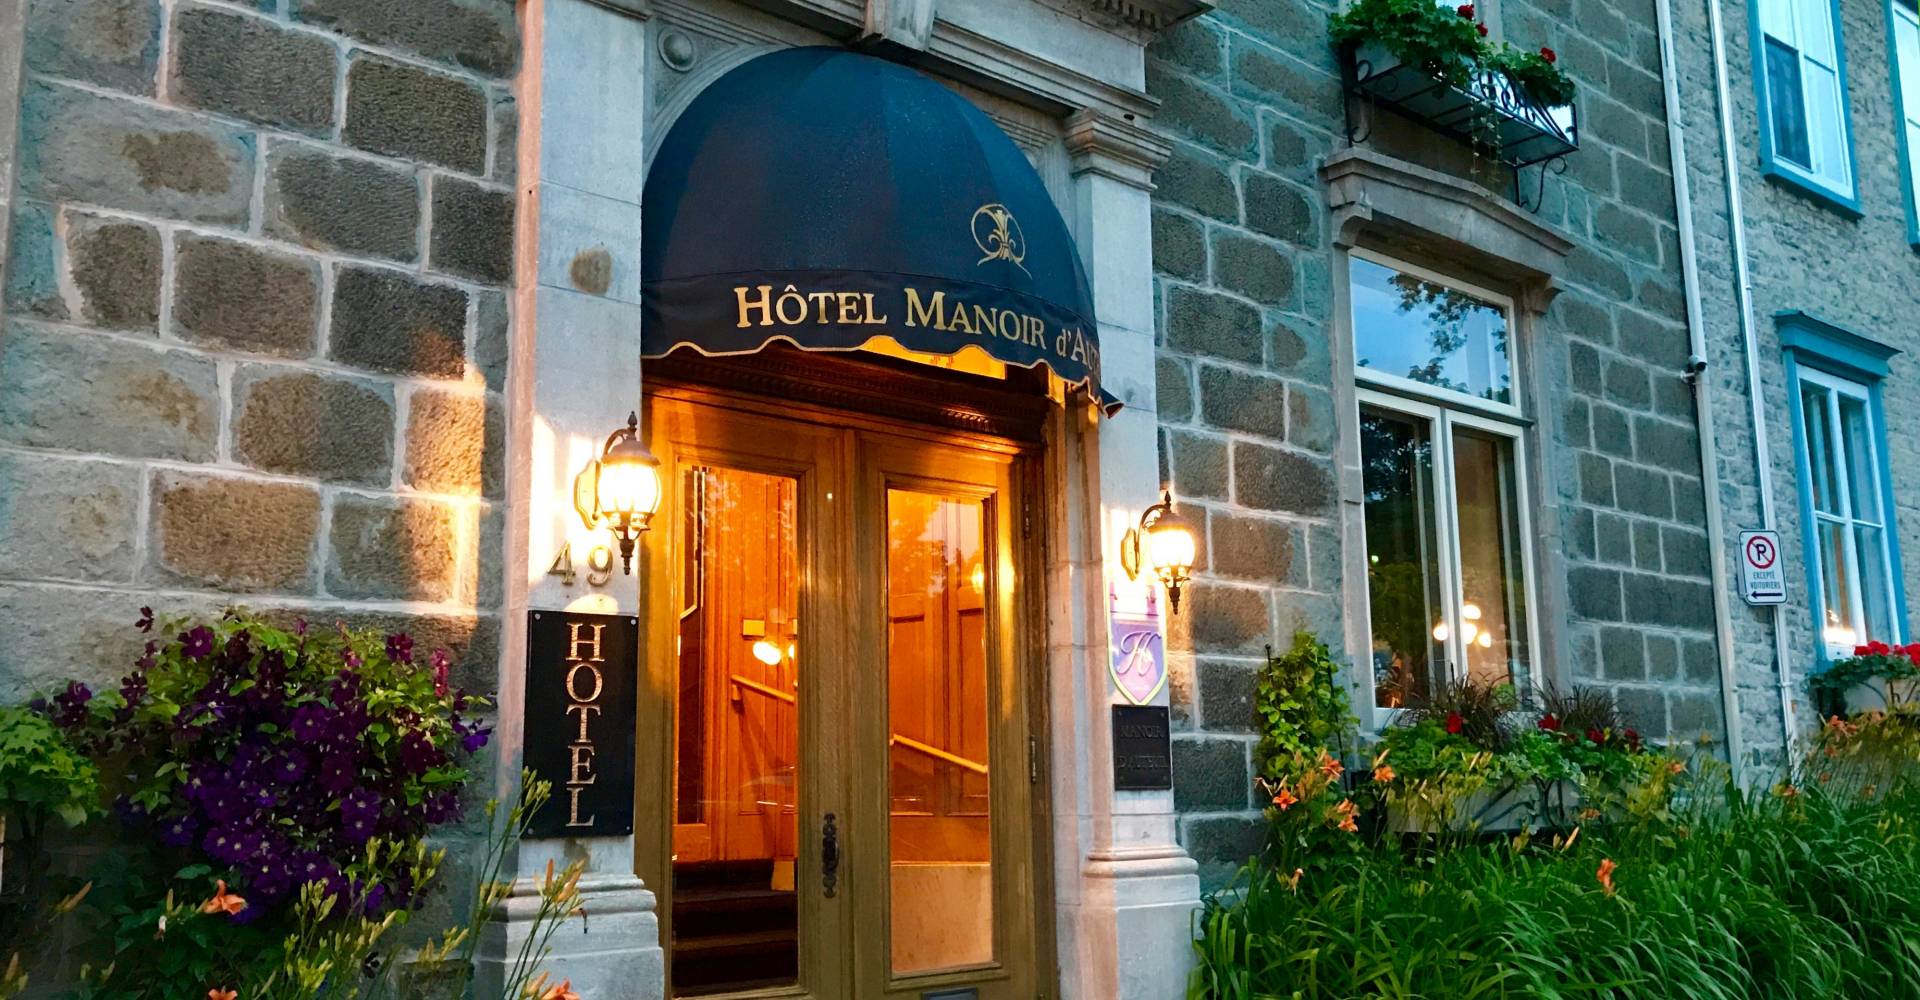 Old Quebec City hotel, the charm of a boutique hotel located in an